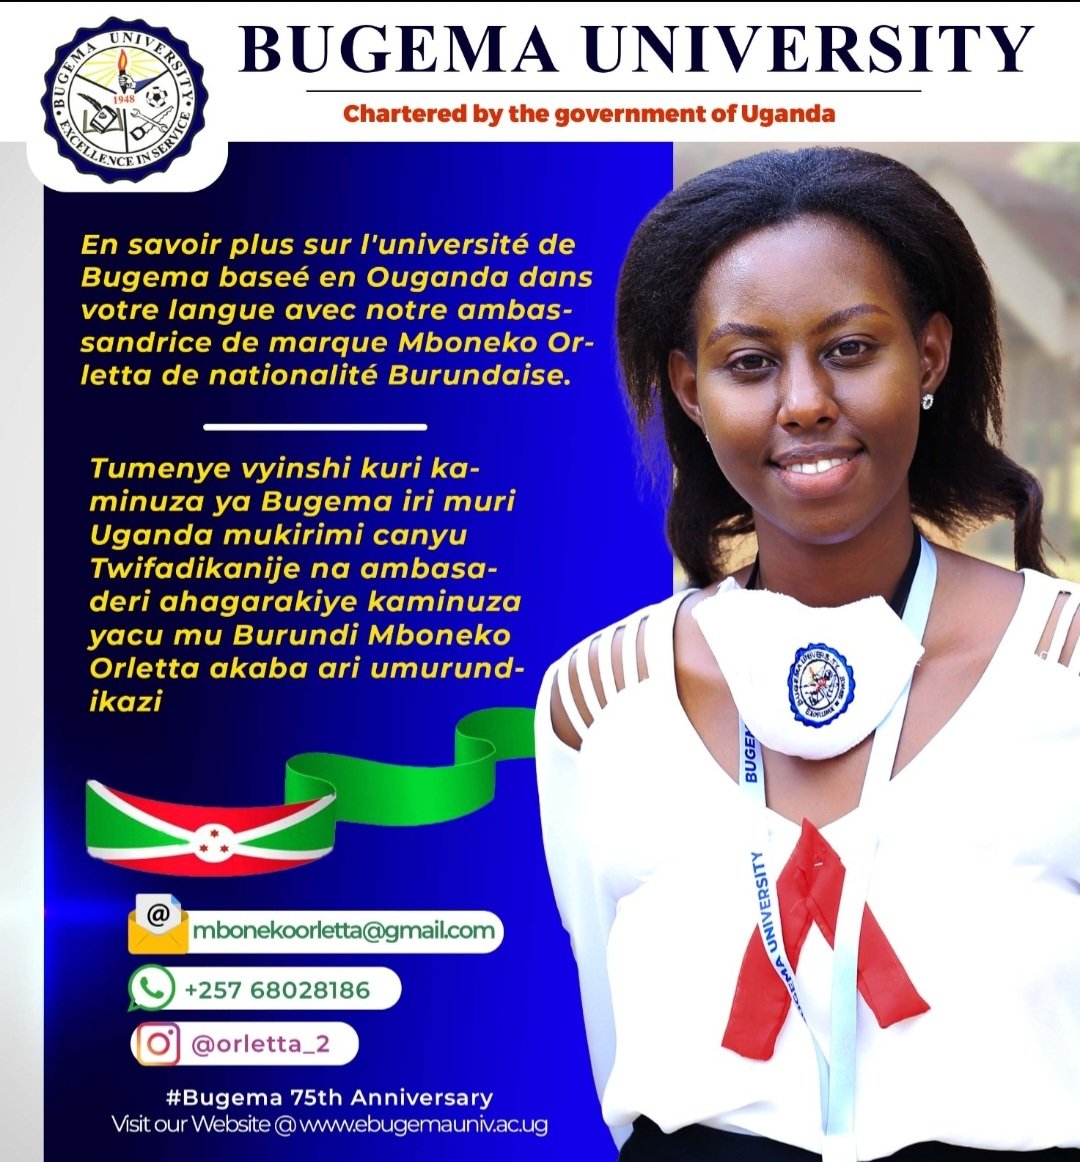 🌍🏫 Discover the vibrant diversity at Bugema University! As a Seventh-day Adventist institution in Uganda, we embrace students from across the globe while fostering religious freedom. Join our inclusive community today! 🌟🙏 #BugemaUniversity #GlobalEducation #ReligiousFreedom